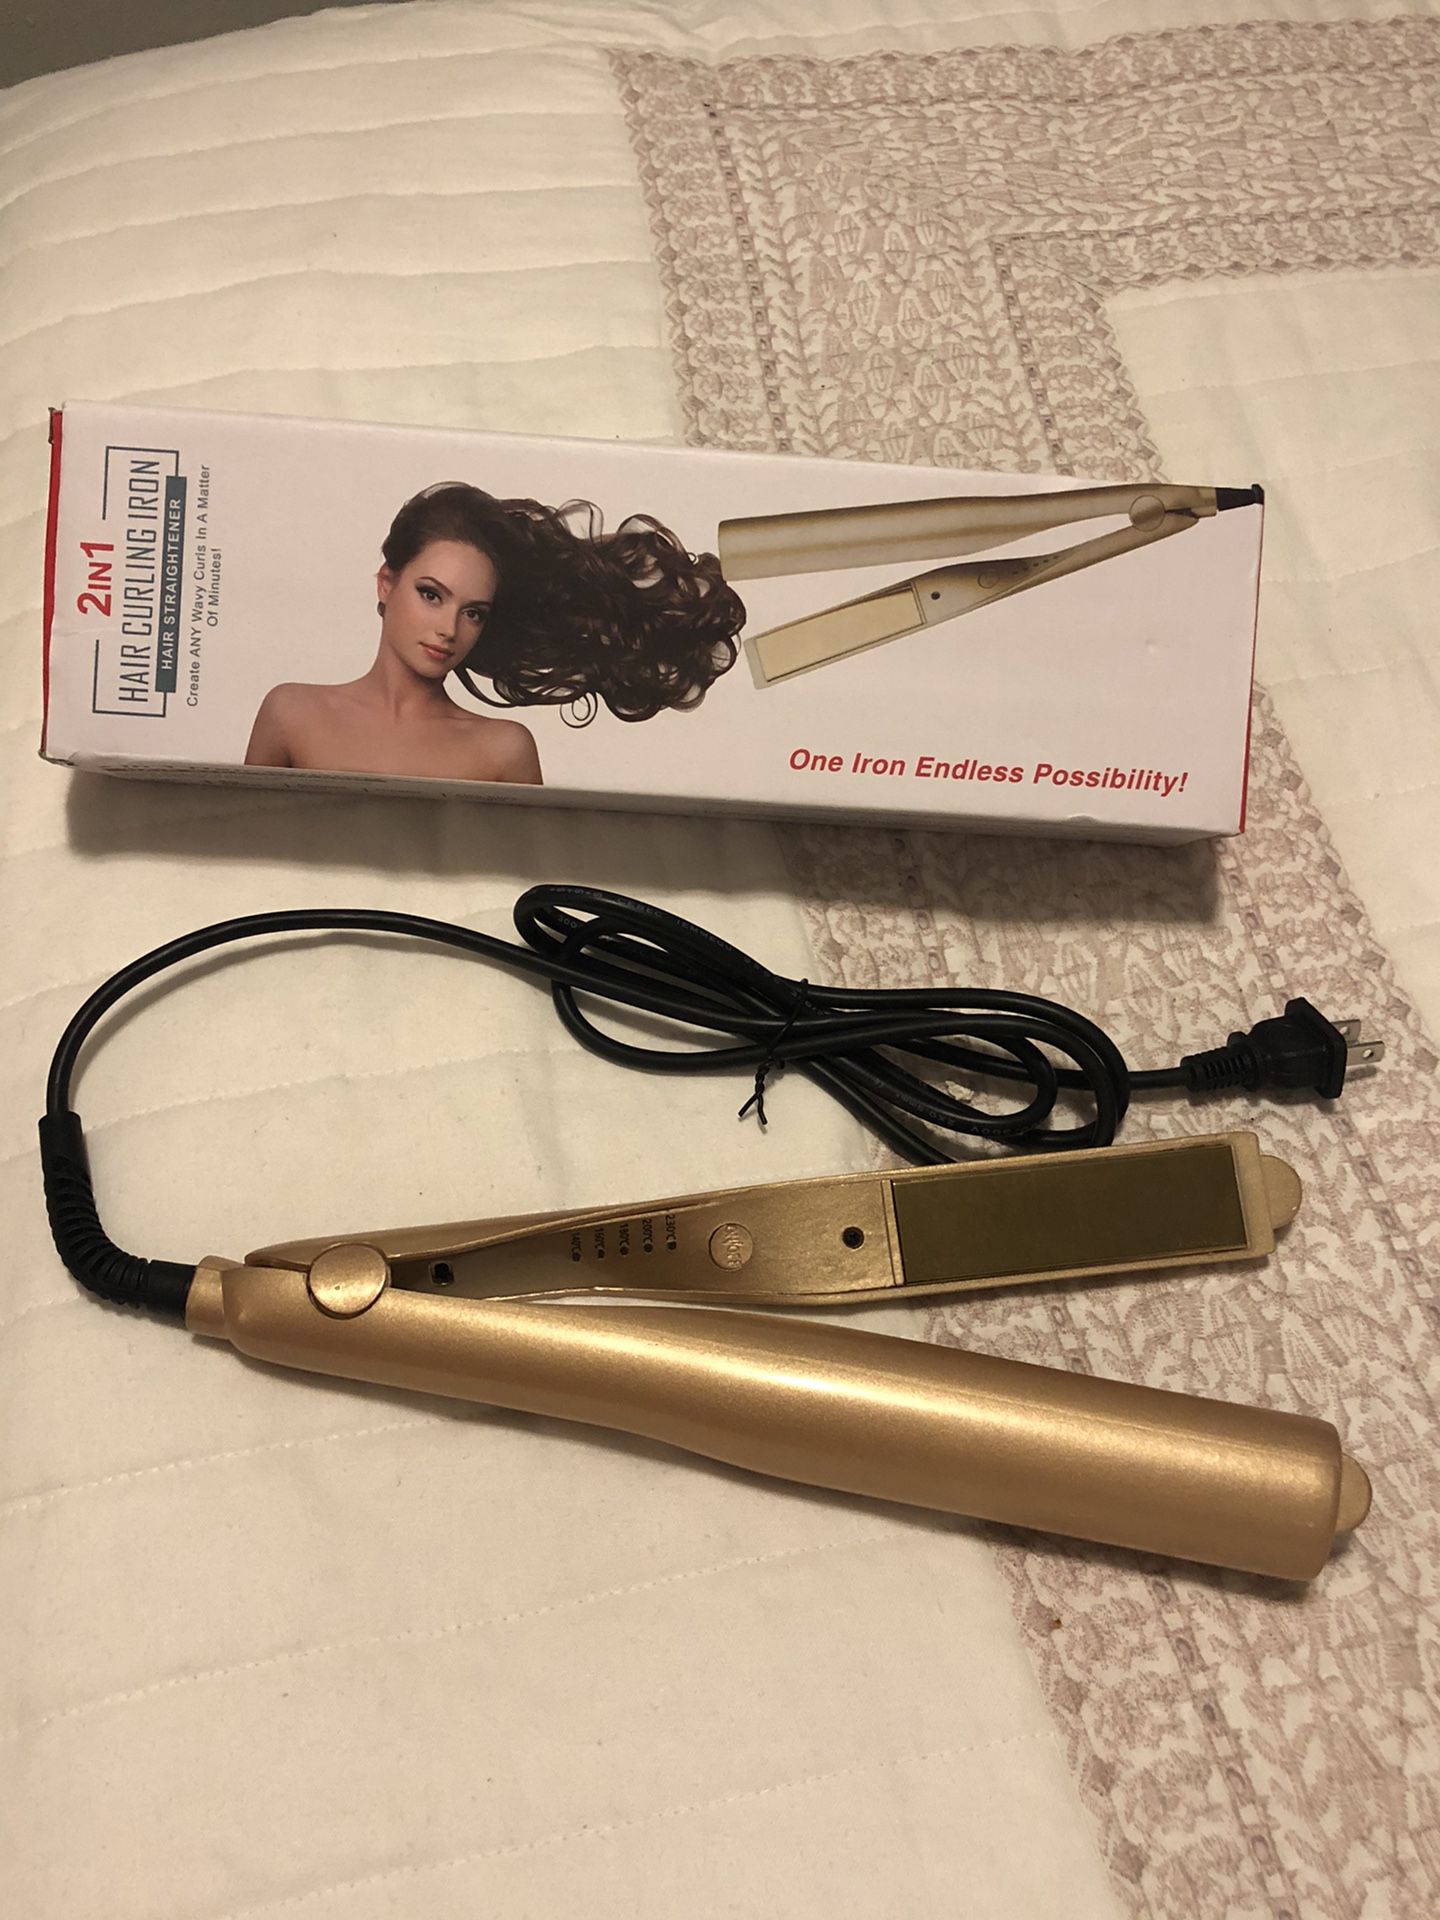 Hair straightener/ curling iron two in one